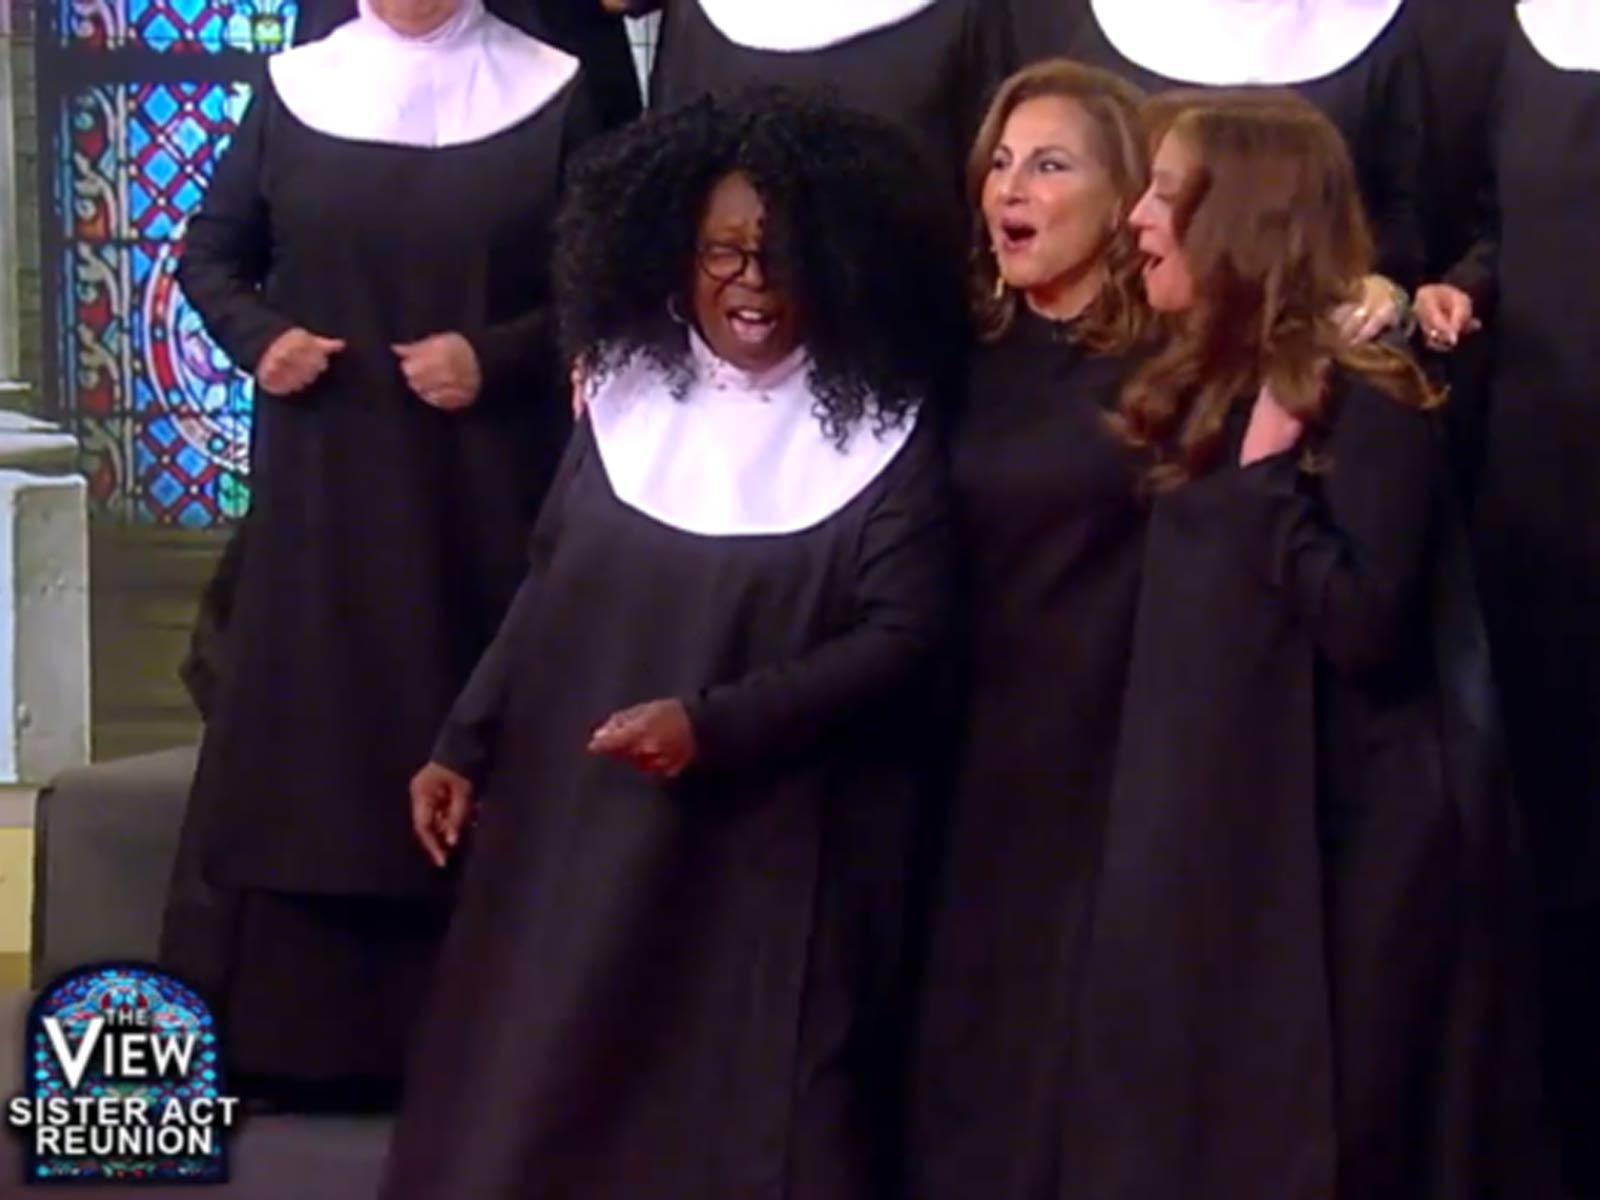 Hallelujah! Sisters Mary Clarence, Mary Patrick and Mary Robert Bring Down the House